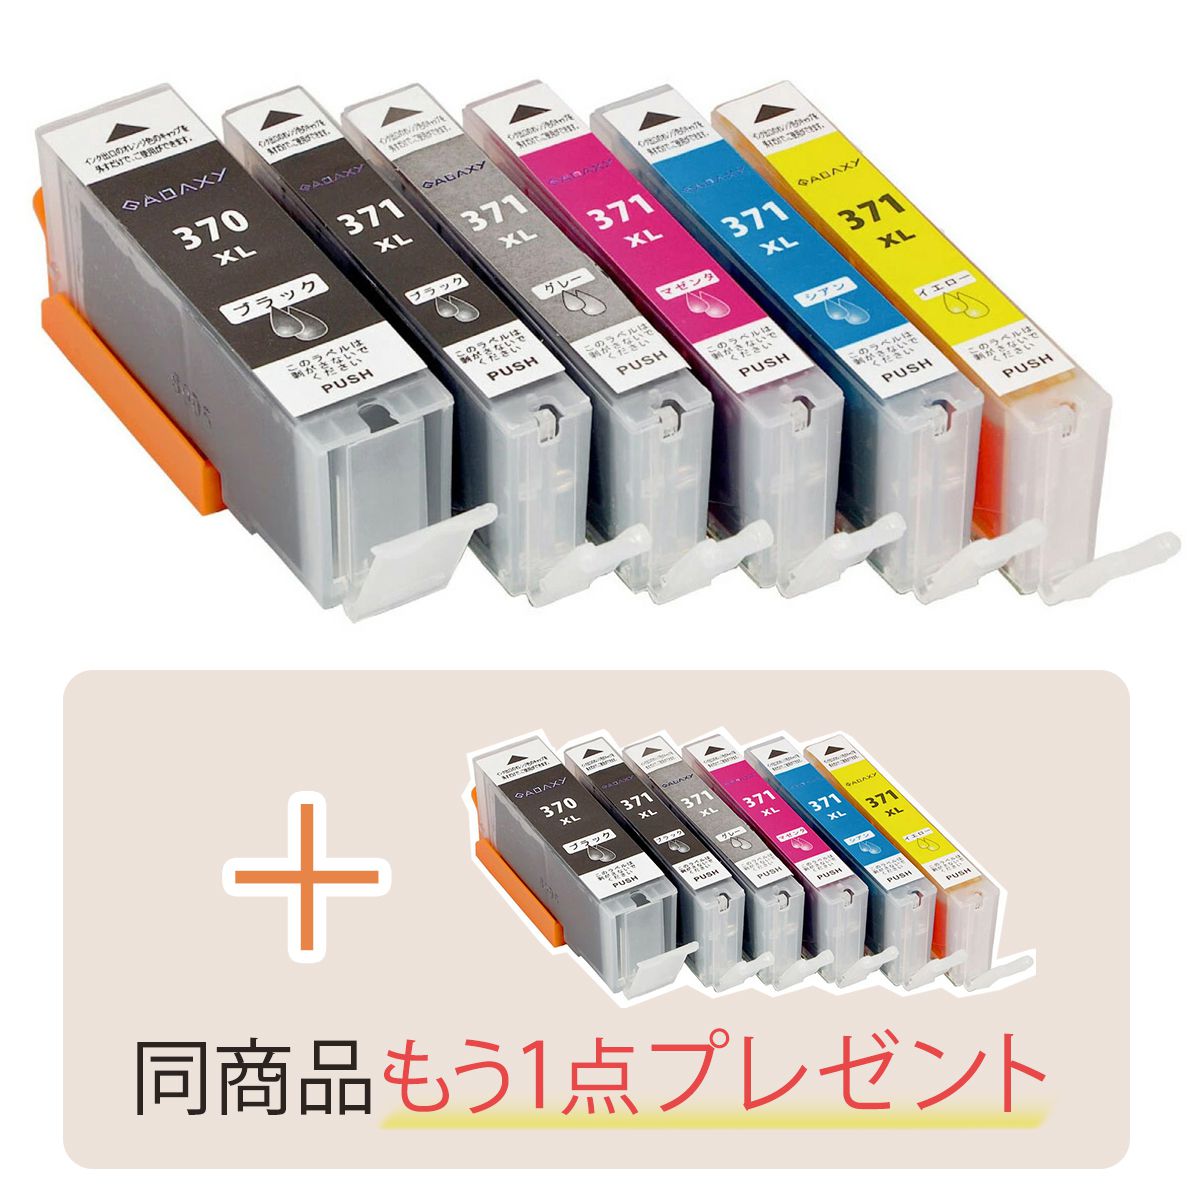 One more gift now] [GALAXY] High quality Canon compatible ink cartrid